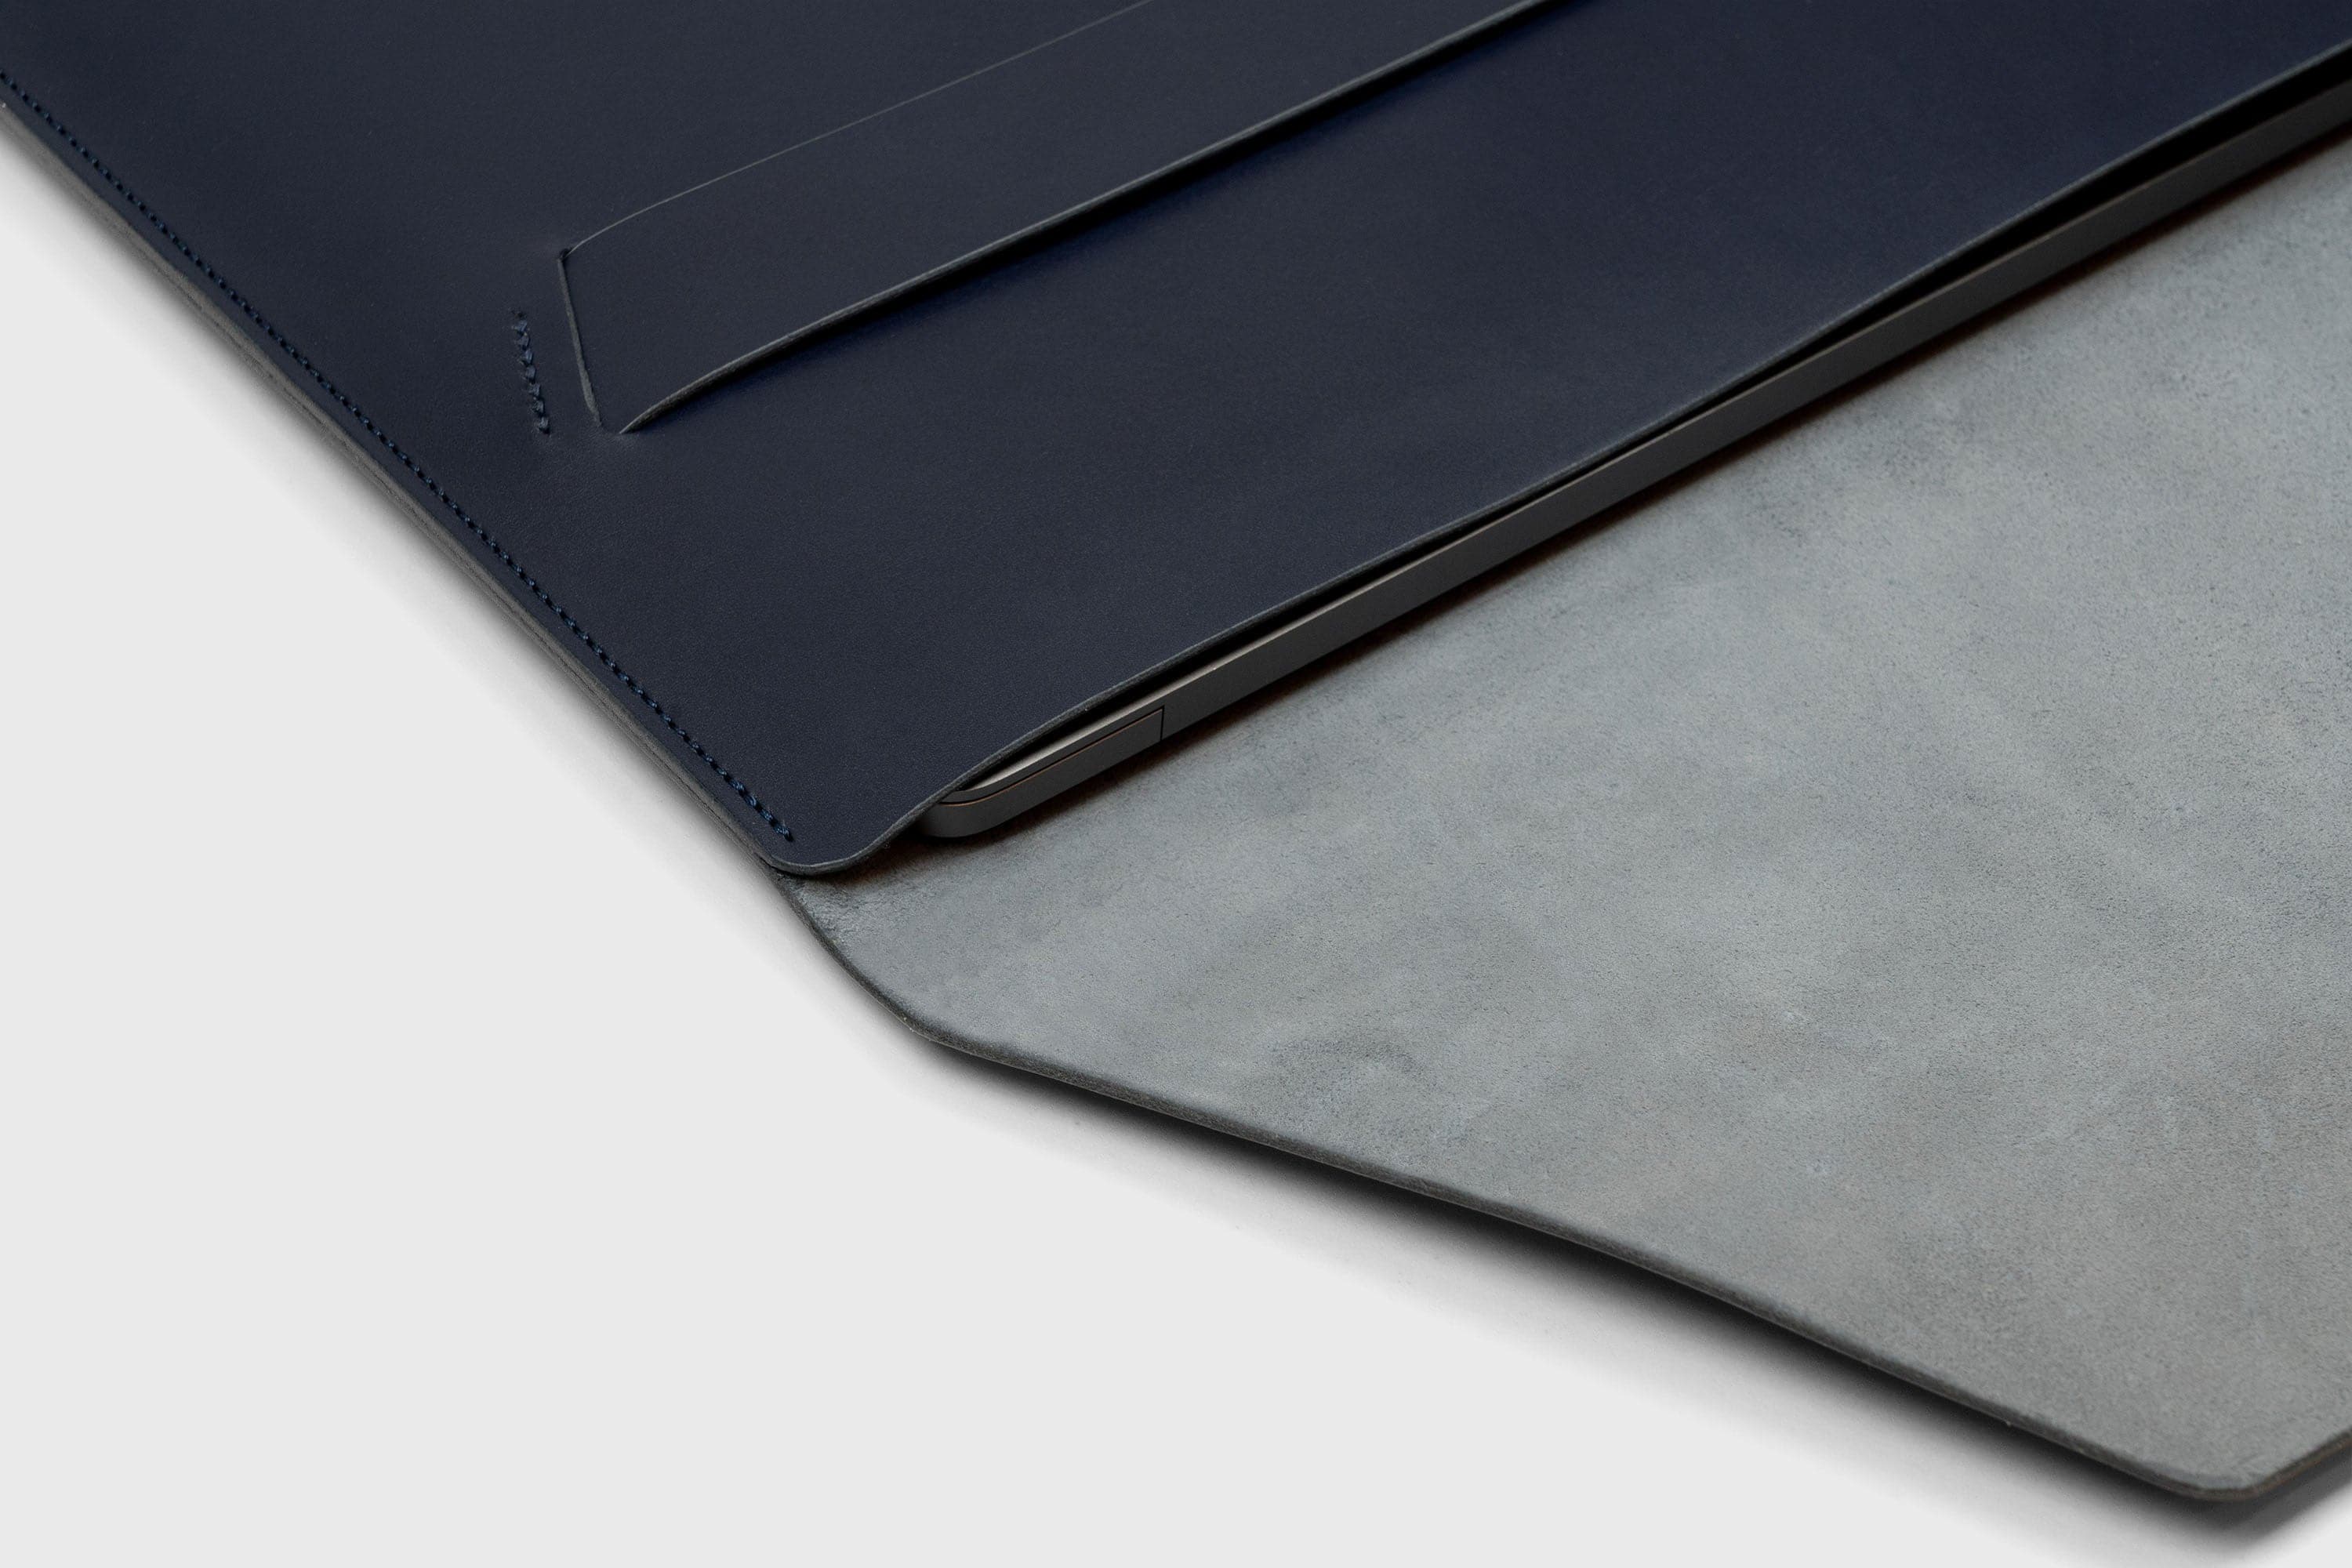 MacBook Sleeve 16 Inch Leather Dark Marine Blue Notebook Sleeve Vegetable Tanned Leather Exclusive Quality Design By Manuel Dreesmann Atelier Madre Barcelona Spain